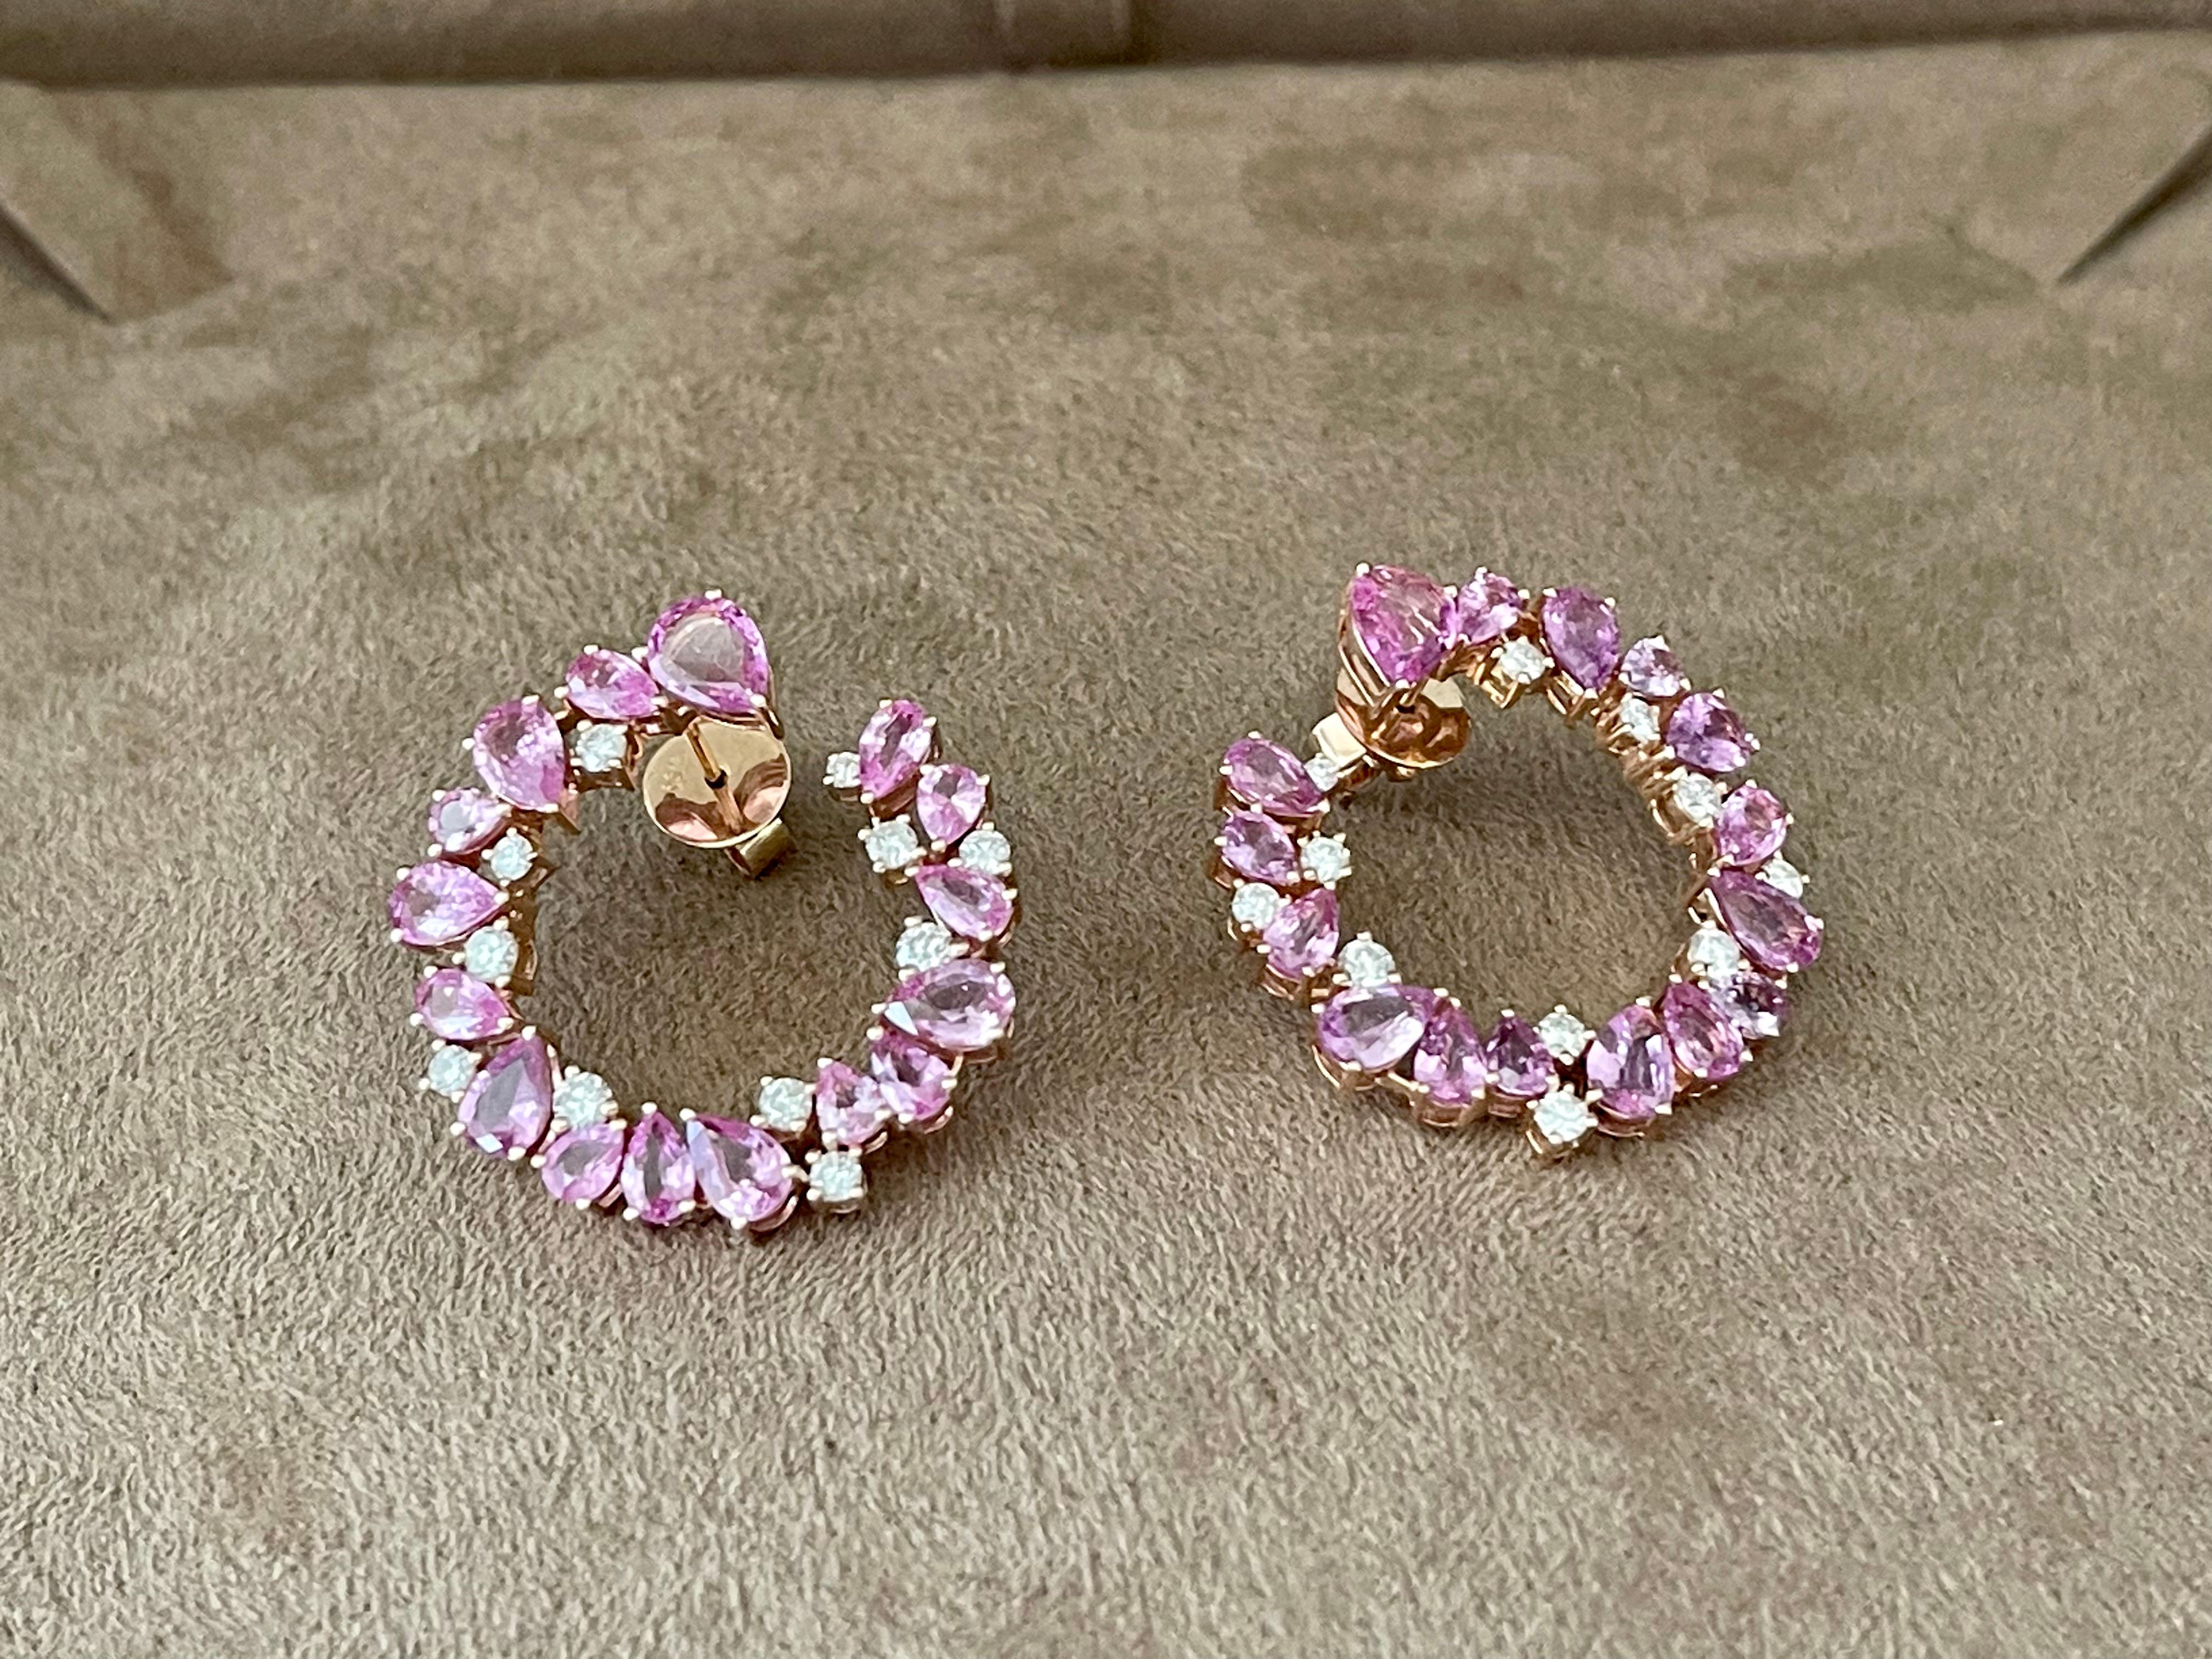 Are you looking for some unique diamond and pink Sapphire hoop earrings that are different and have style? Look no further than these glorious diamond pink Sapphire hoops that sit so perfectly on the ears. Hoops are a must in everyone's wardrobe but